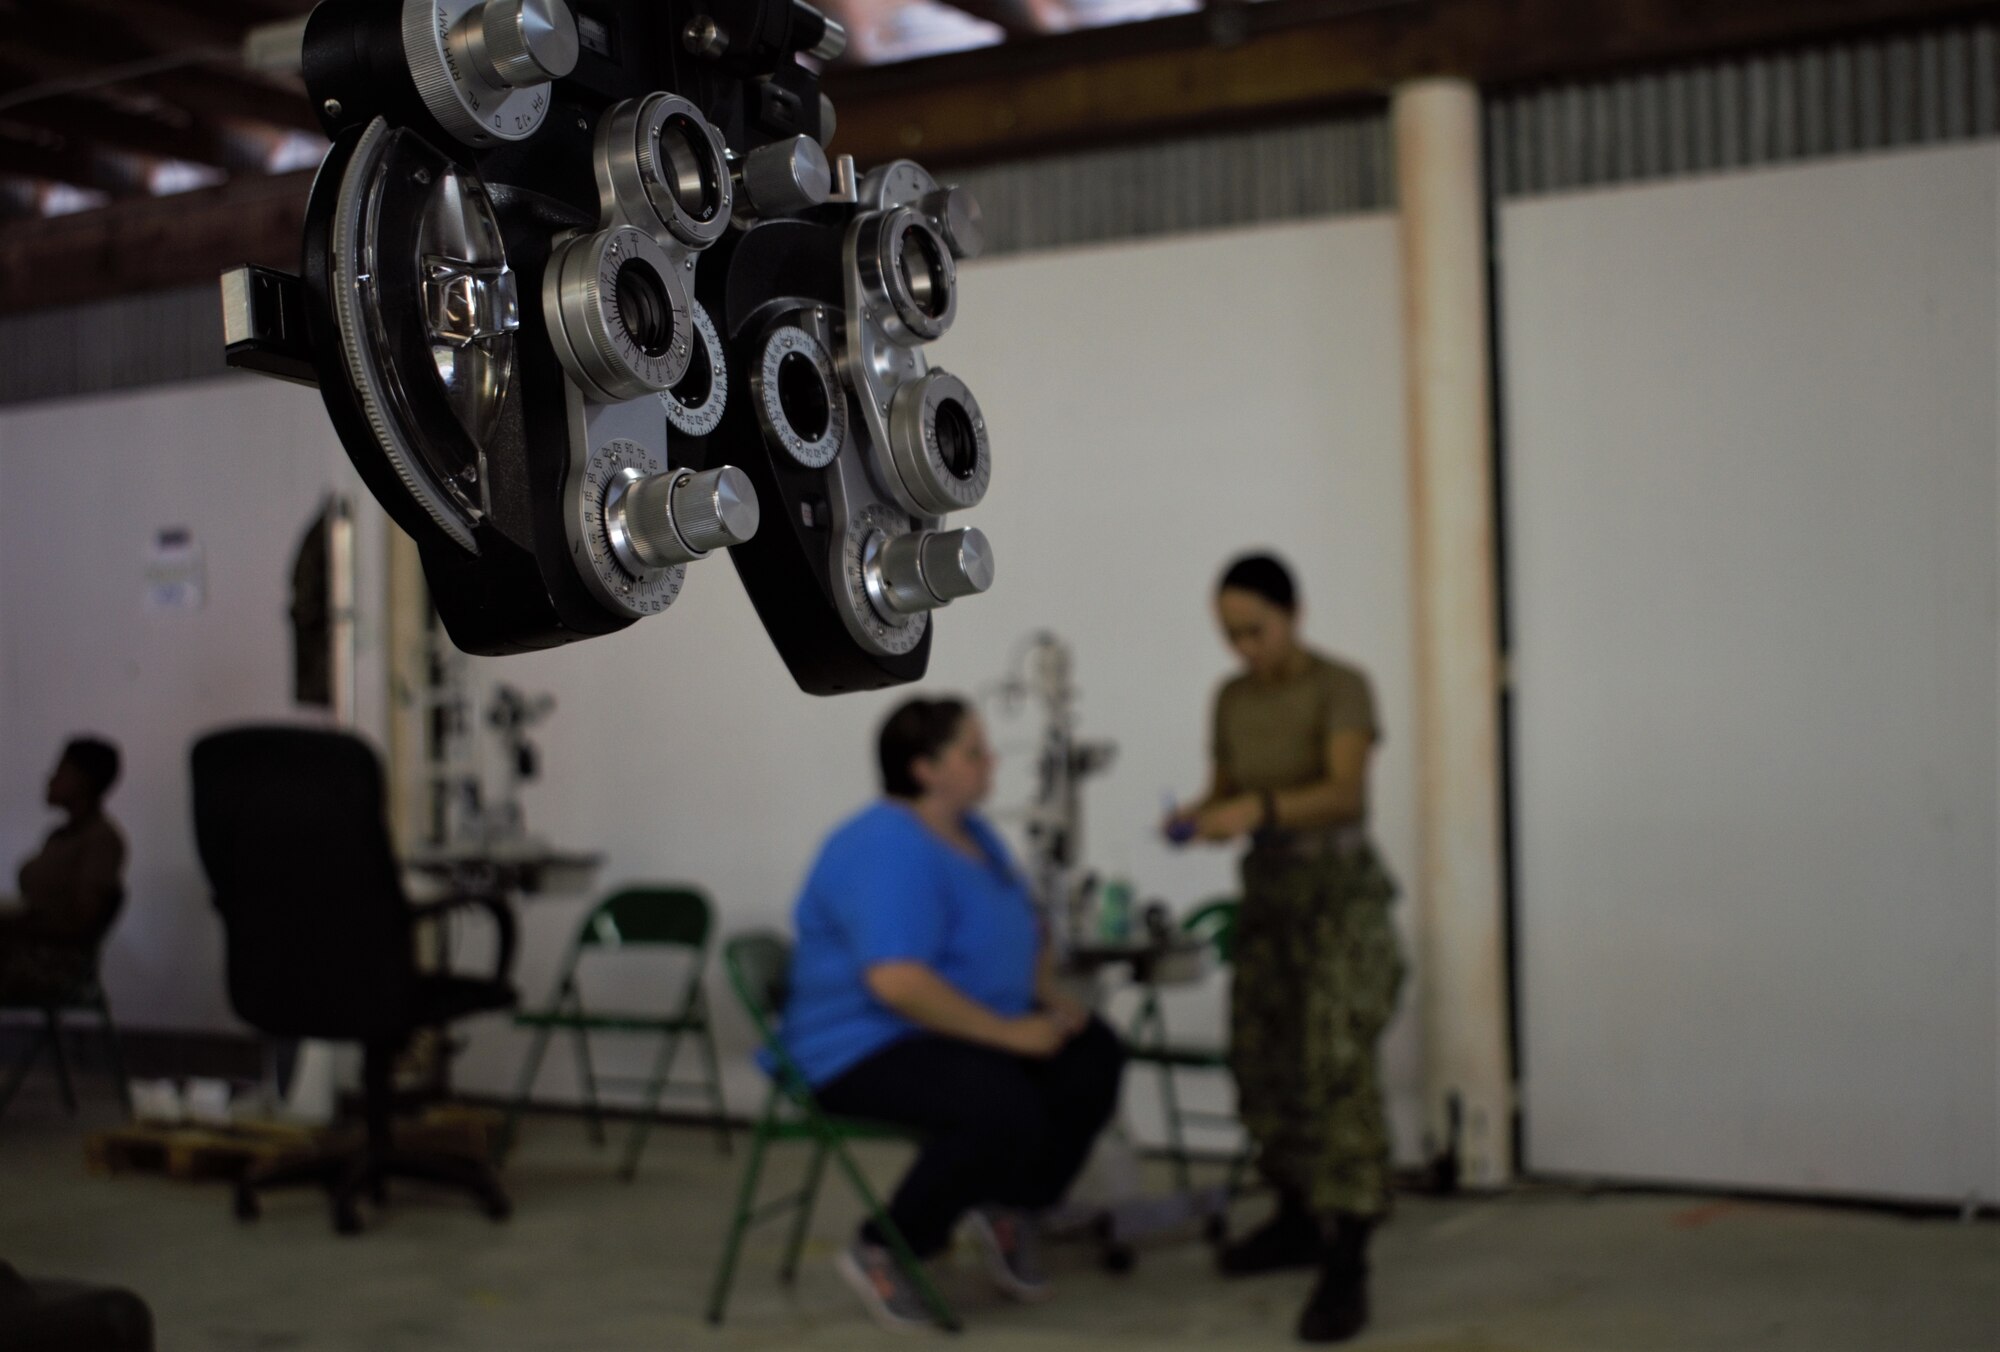 U.S. Navy Reserve Lt. Gillian Claveria-Oooms, optometrist, Expeditionary Medical Facility Dallas One, Ft. Worth, Texas, examines a patient at Innovative Readiness Training Appalachian Care 2019 at Wise County Fairgrounds, Wise, Va., Aug. 18, 2019. Appalachian Care Innovative Readiness Training 2019 takes place Aug. 16-29, 2019, to care for the medically underserved communities of Wise, Virginia while simultaneously conducting deployment and readiness training for military personnel. Innovative Readiness Training is the only hands-on training opportunity authorized to operate within the U.S. During Appalachian Care IRT 2019, medical operations will be staged at one physical location at Wise County Fairgrounds. The Appalachian Care IRT 2019 team provides medical, dental, optometry and veterinary care to assist local health and municipal authorities in addressing underserved and unmet community health and civic needs. Units also conduct critical mission training and logistical movement in order to simulate hands-on deployment readiness operations and health care delivery in the time of crisis, conflict or disaster. (Air National Guard photo by 1st Lt. Andrew Layton)